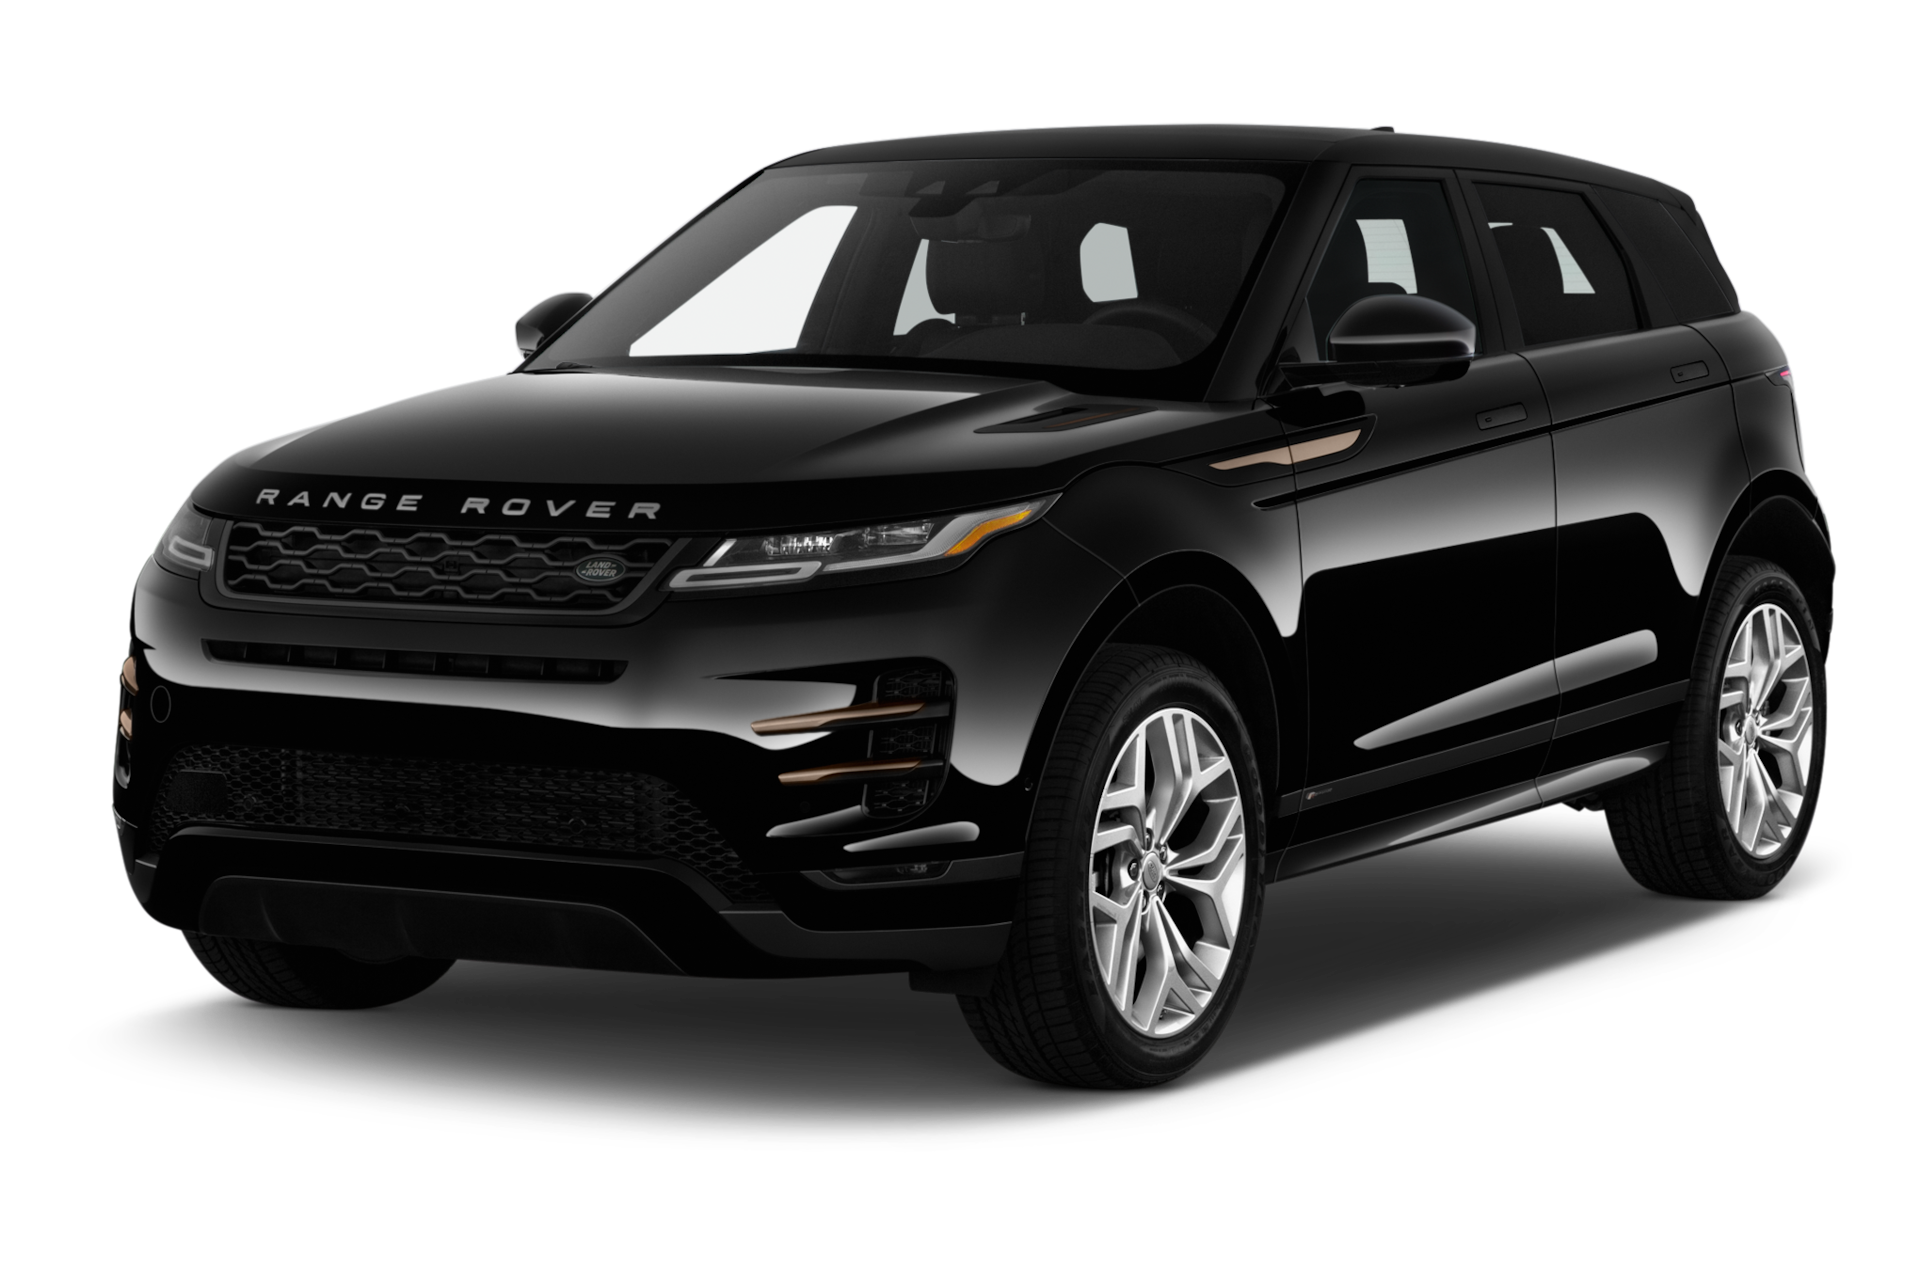 2020 Land Rover Range Rover Evoque Prices, Reviews, and Photos - MotorTrend